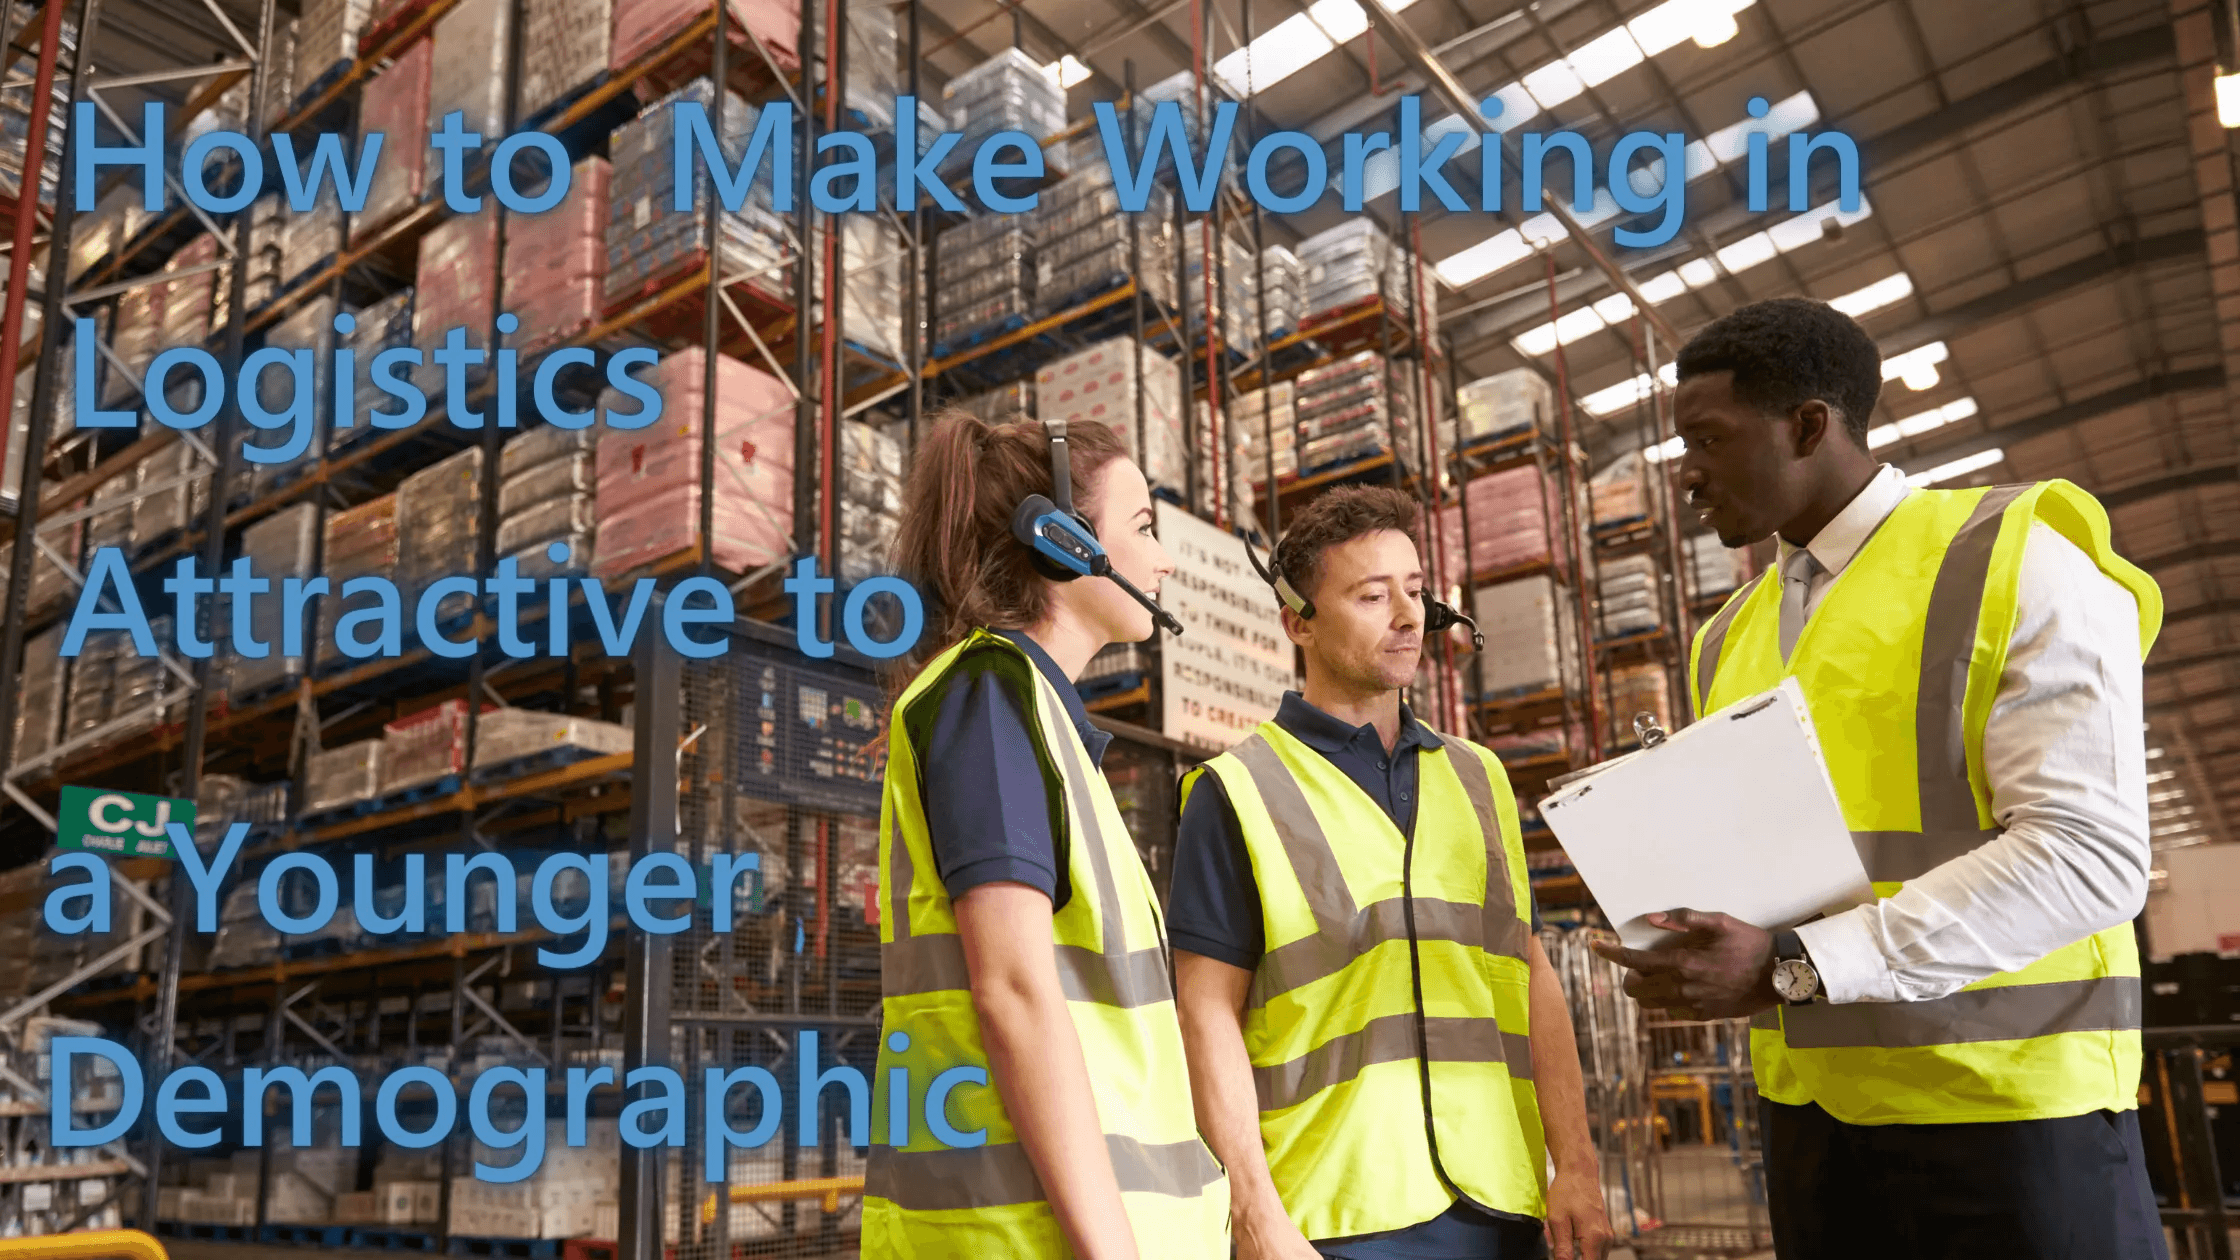 Young workers talking in a warehouse with the text "How to Make Working in Logistics Attractive to a Younger Demographic"